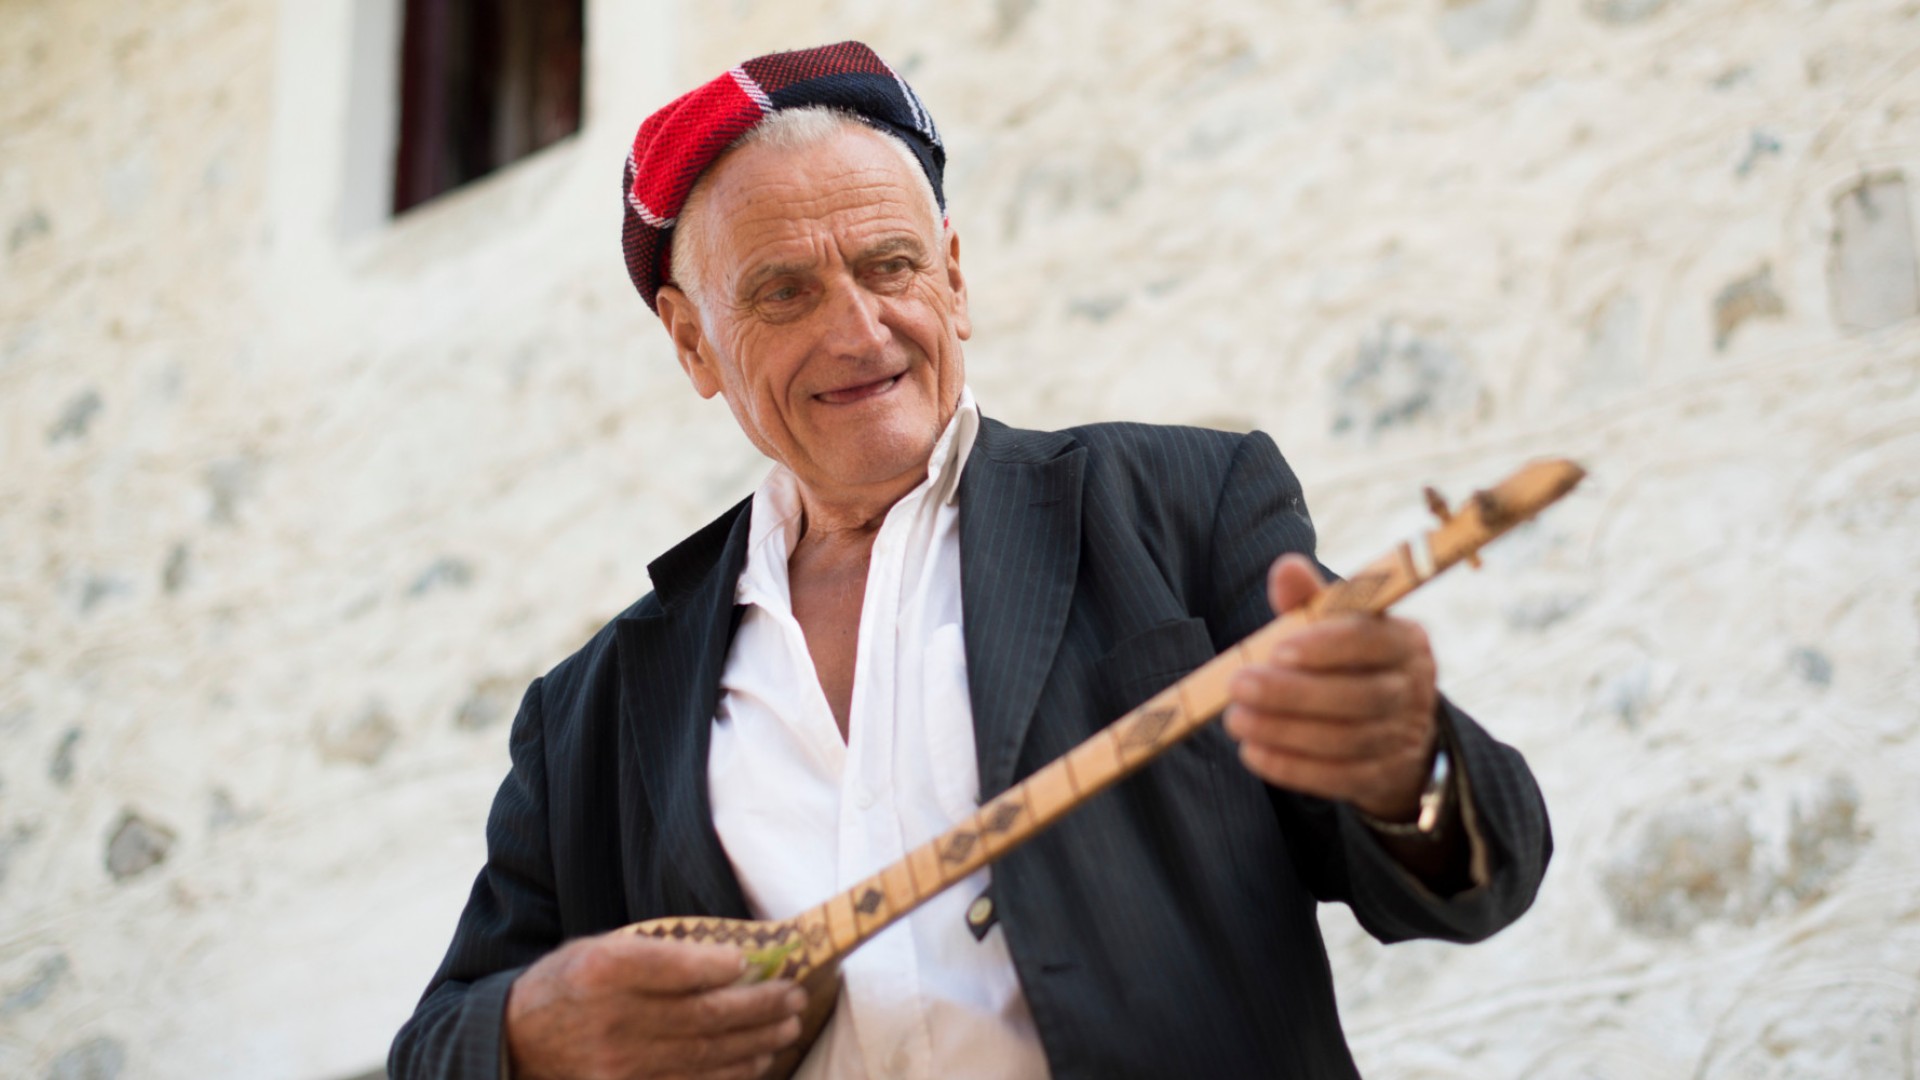 Albanian man wearing a colorful hat playing the guitar in the streets